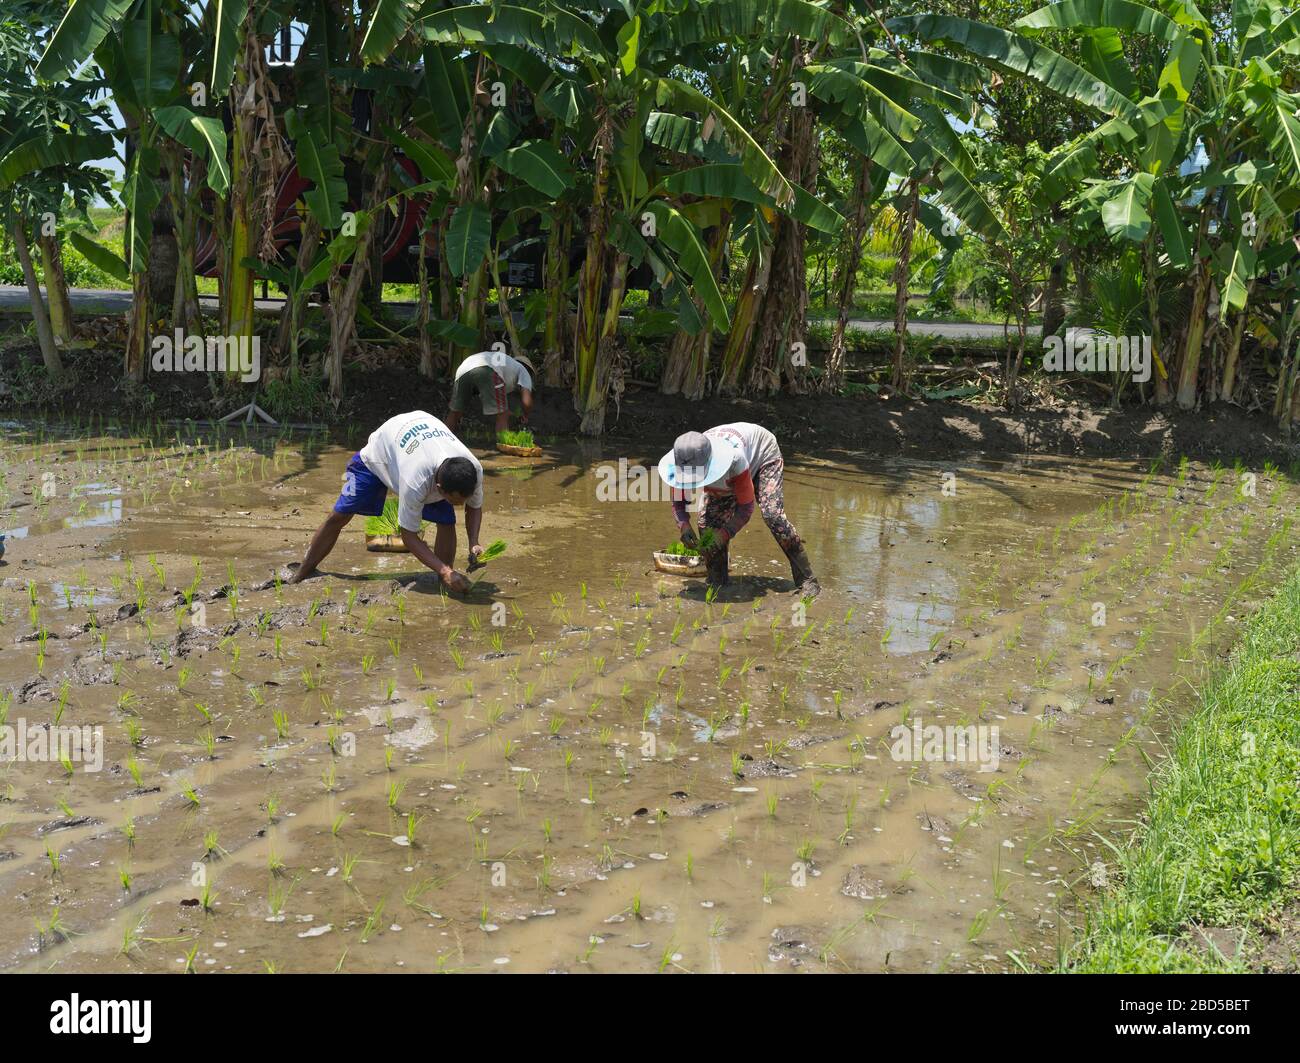 dh Local Balinese people asia BALI INDONESIA Planting rice in paddy field worker wet fields agriculture workers crop fieldworkers Stock Photo